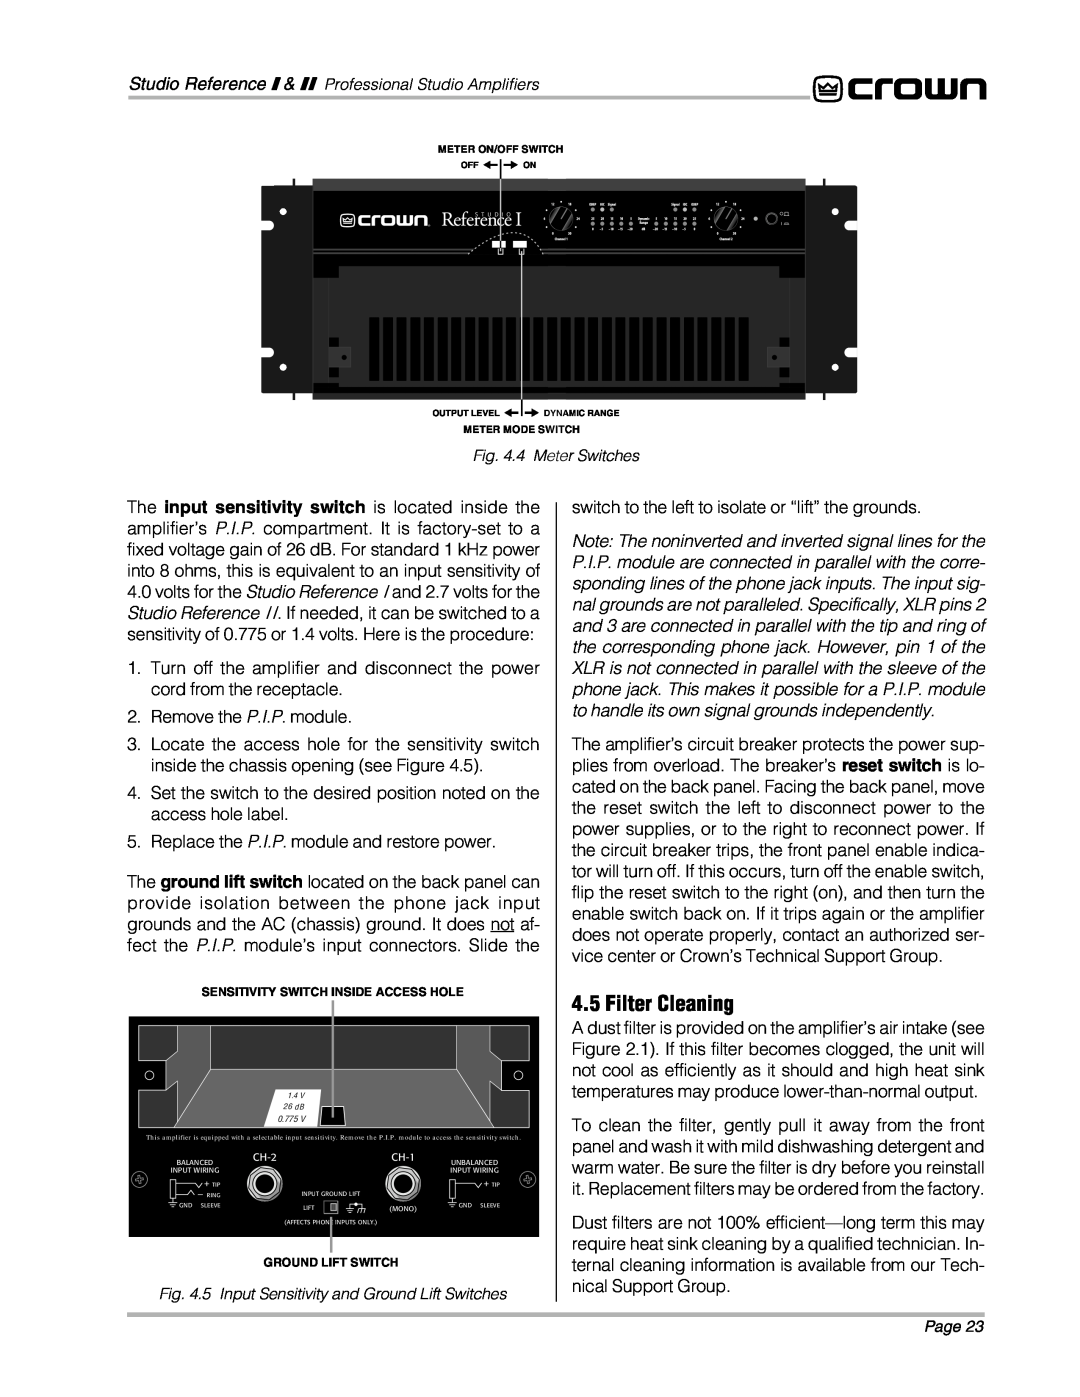 Crown Audio STUDIO AMPLIFIER owner manual Filter Cleaning 